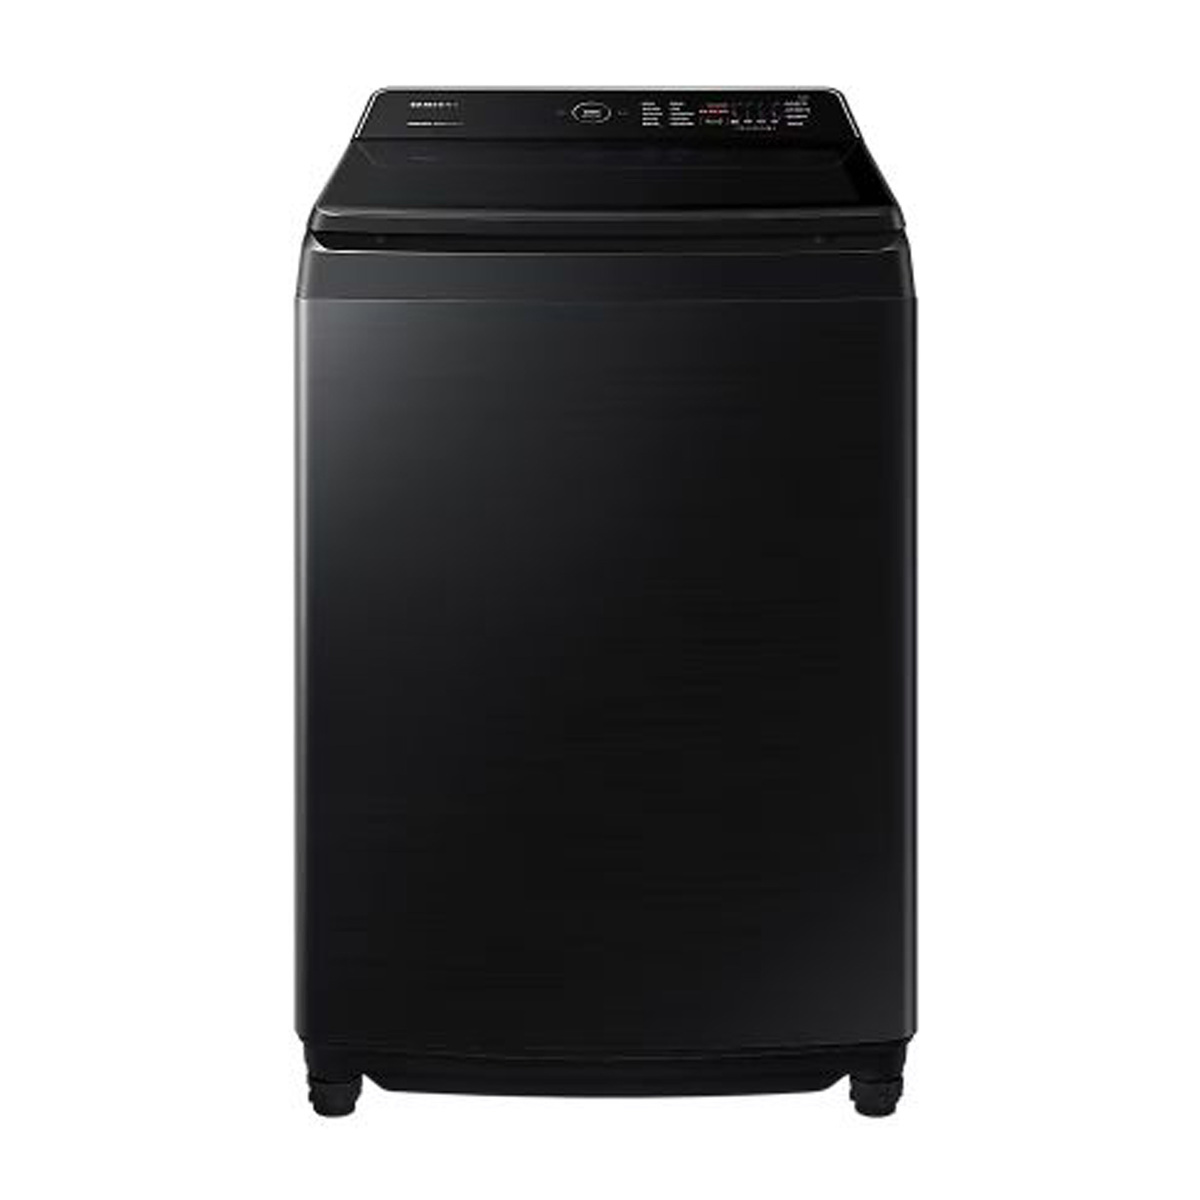 Samsung Top load Washer with Ecobubble and Digital Inverter Technology, 16 kg, 700 RPM, Black, WA16CG6745BV SG